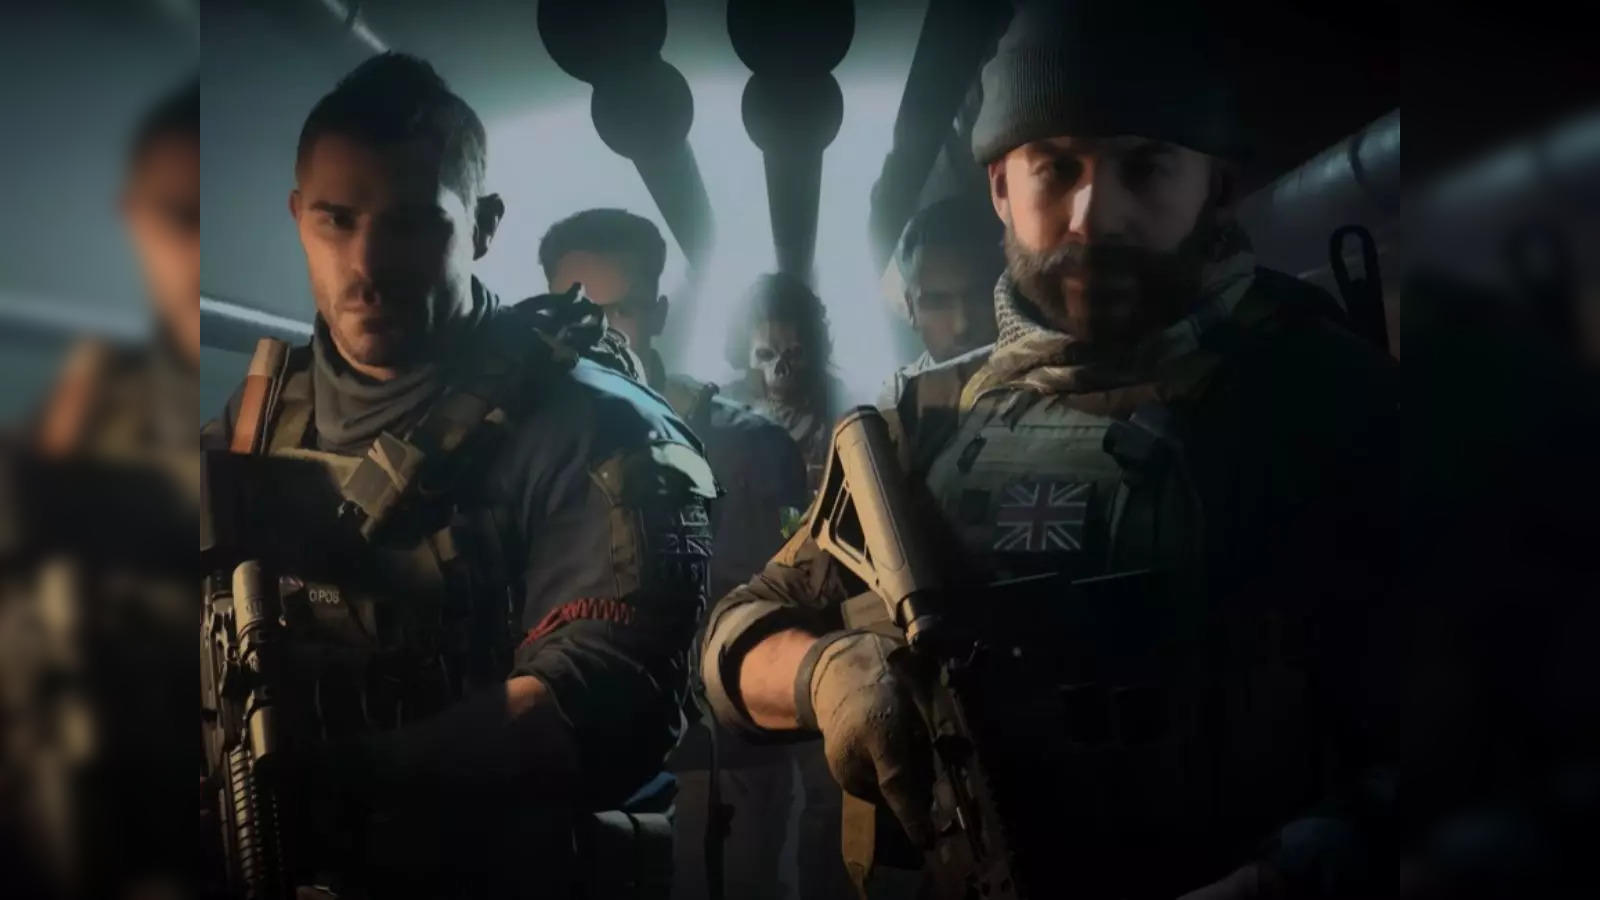 Modern Warfare 3 trailer reveals the return of the series' most